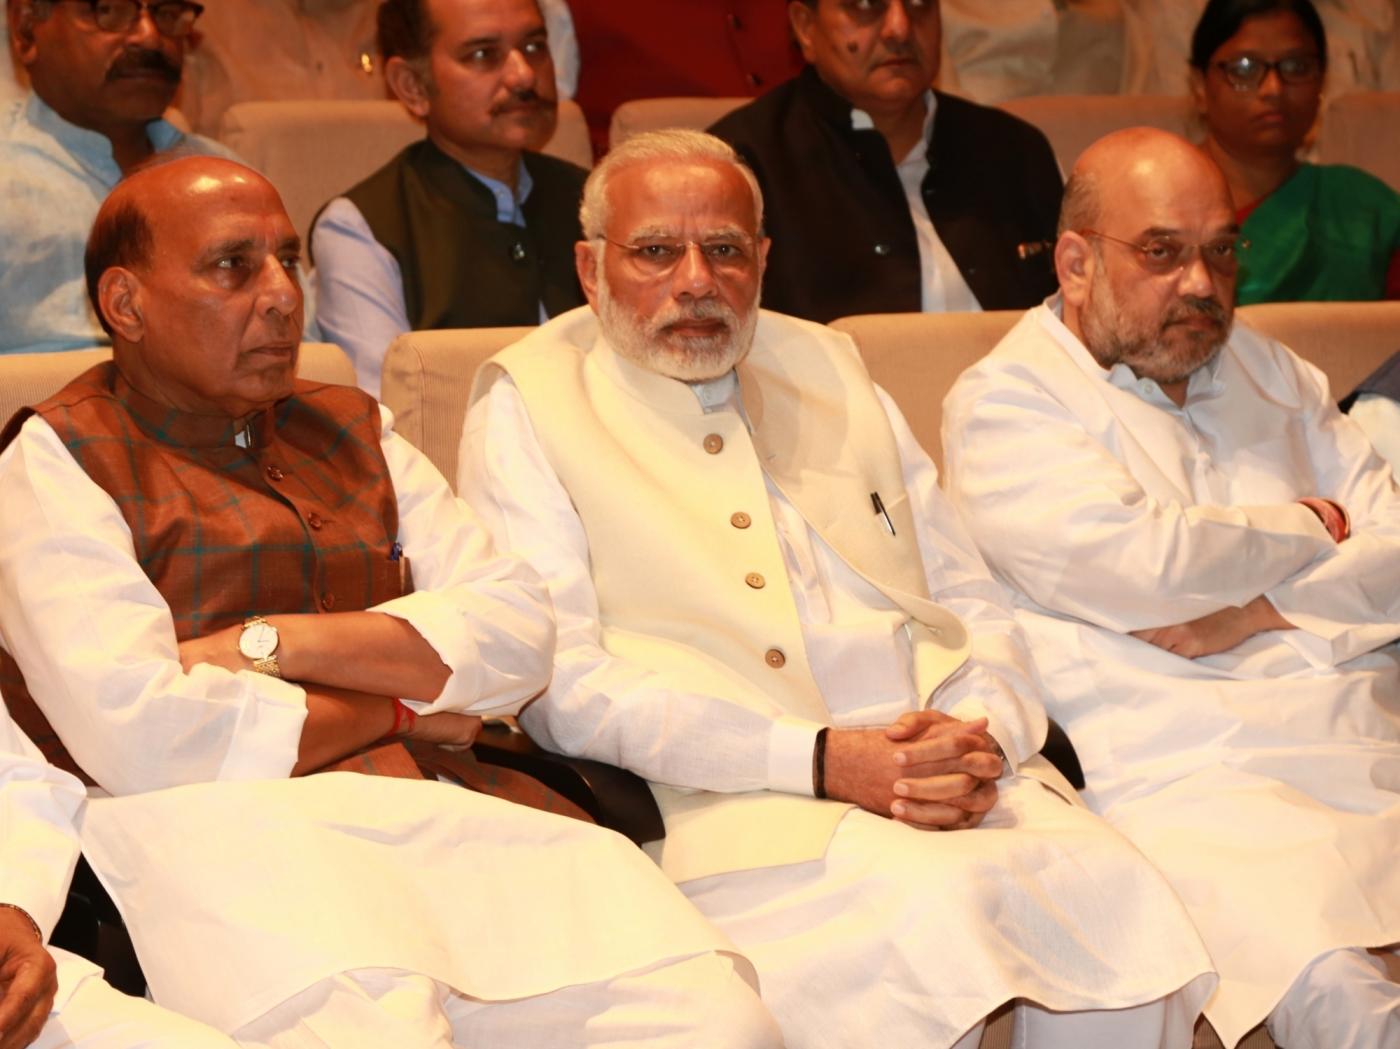 New Delhi: Prime Minister Narendra Modi with party president Amit Shah (R) and Rajnath Singh (L) at BJP parliamentary party meeting at Parliament House on March 13, 2018. (Photo: Amlan Paliwal/IANS) by .